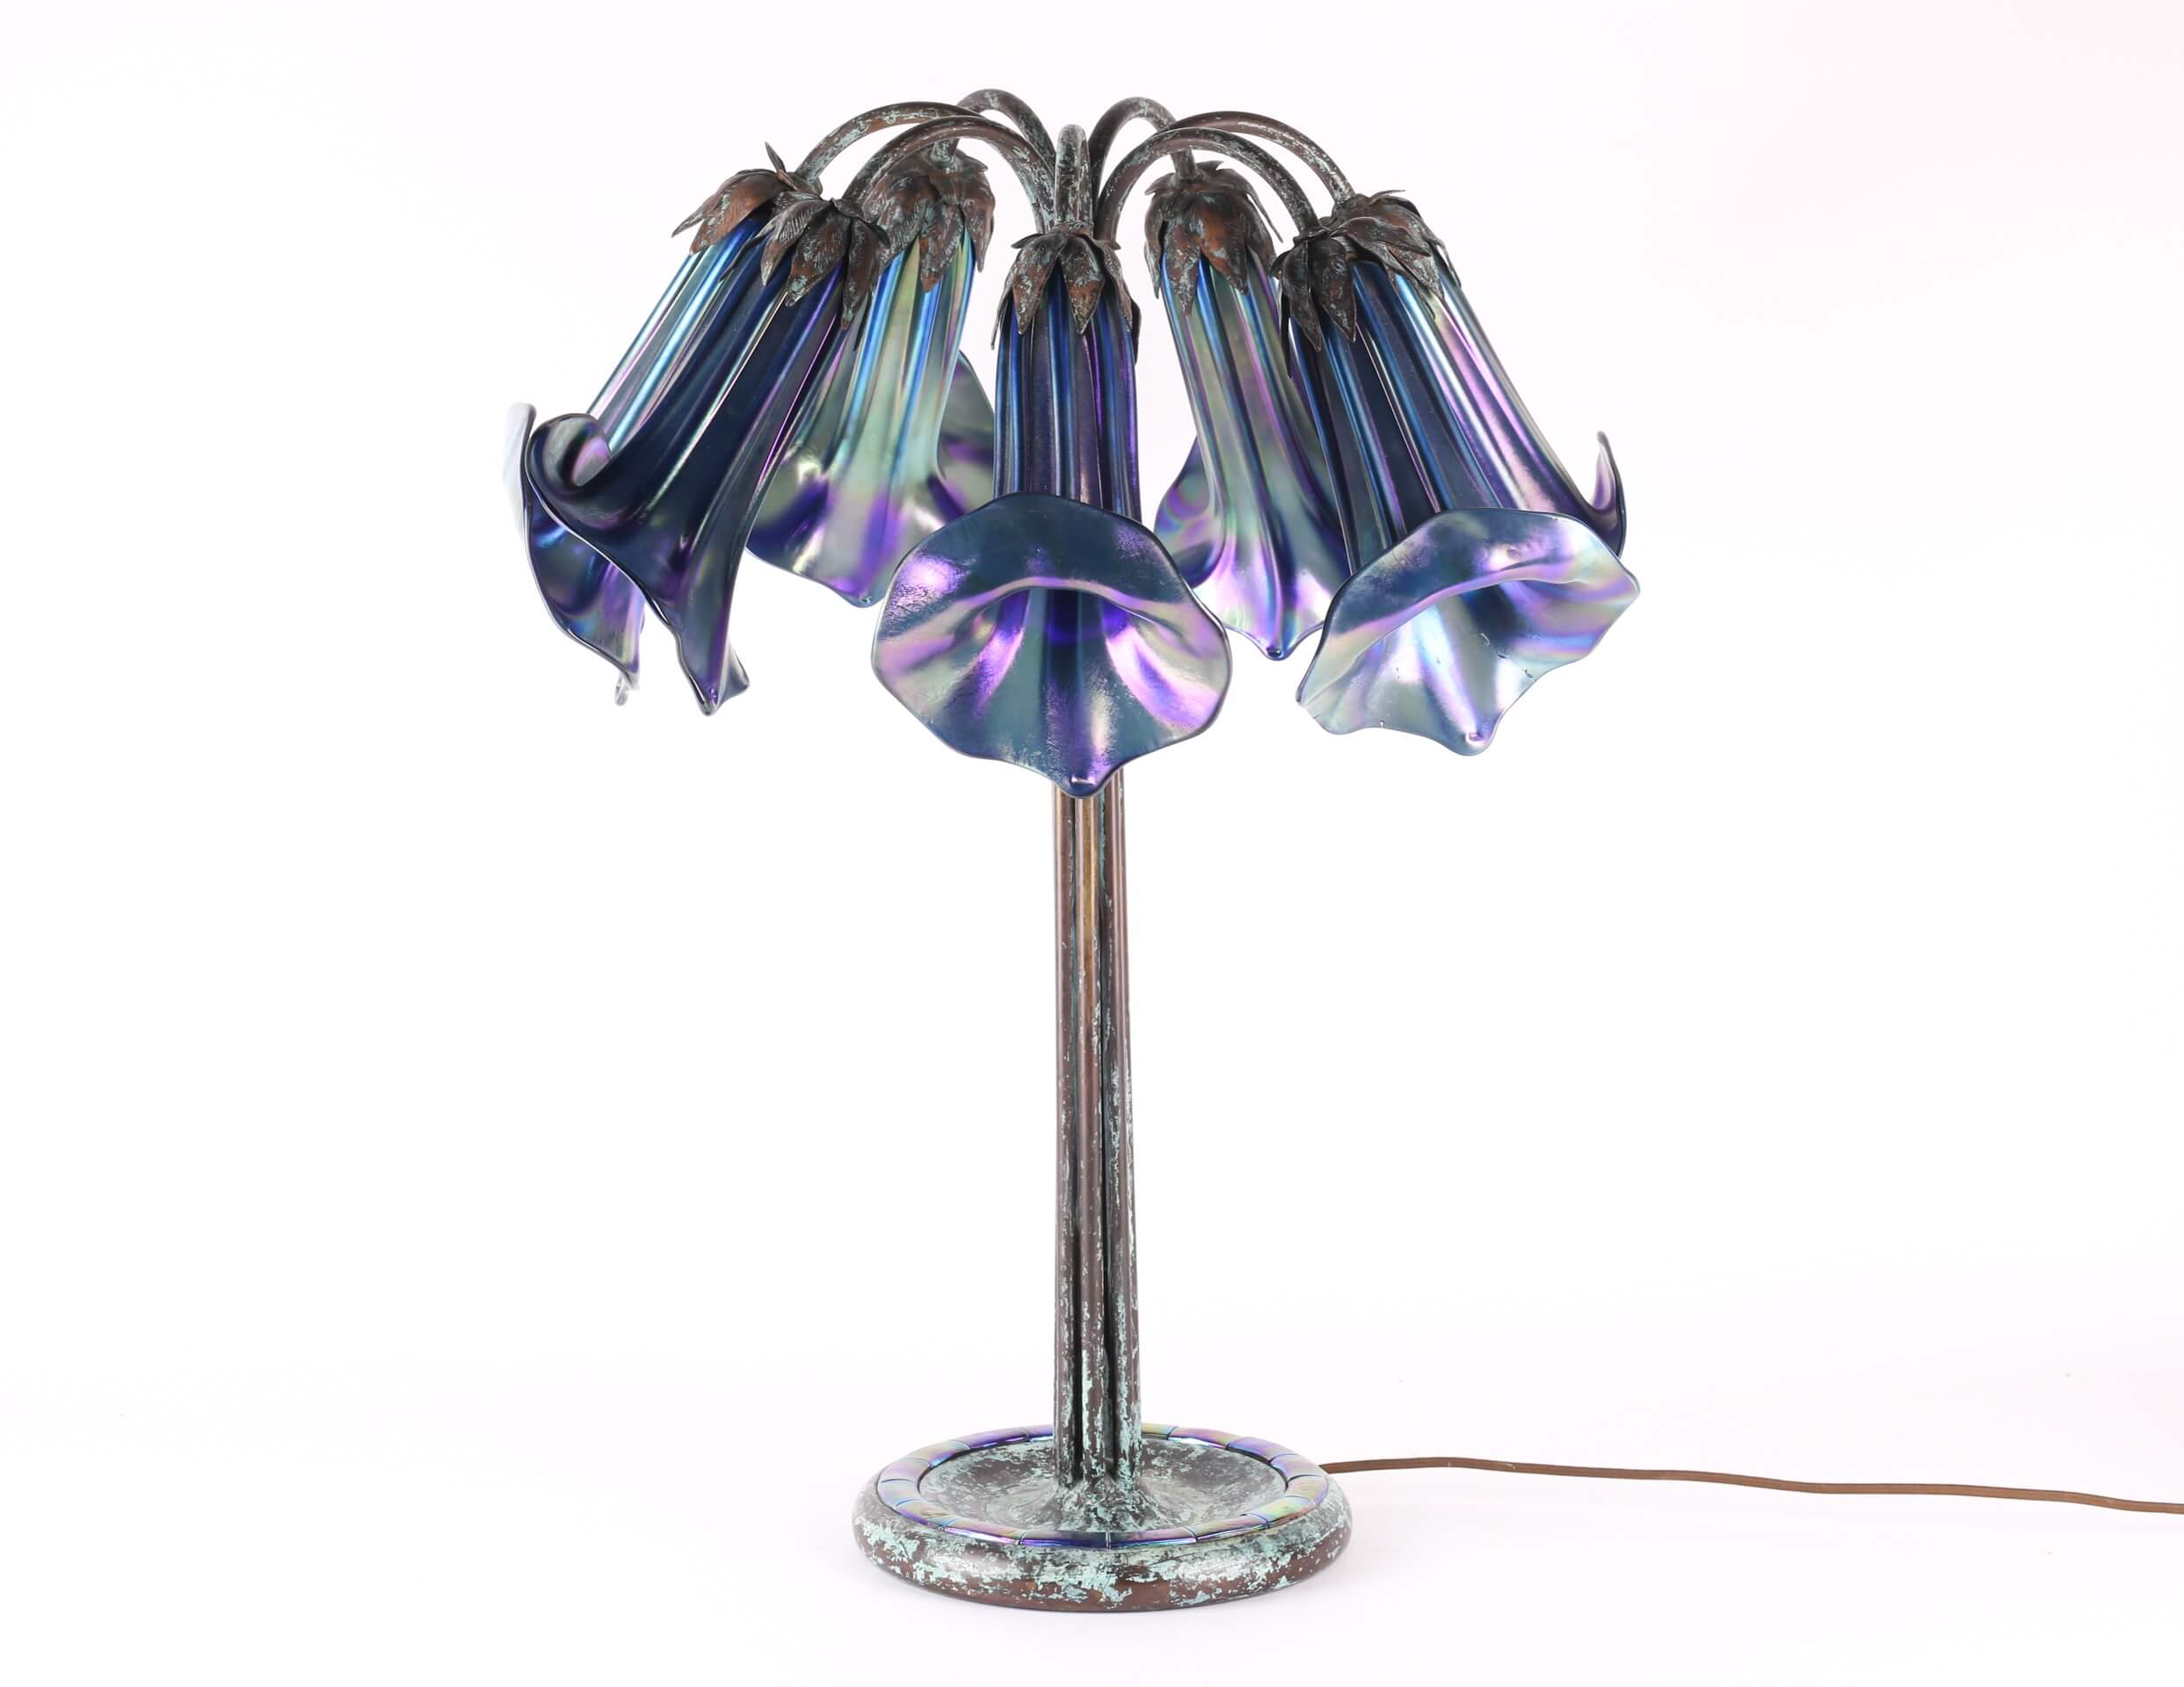 A 'Tiffany Studios New York' seven-lamp glass 'Lily' table lamp